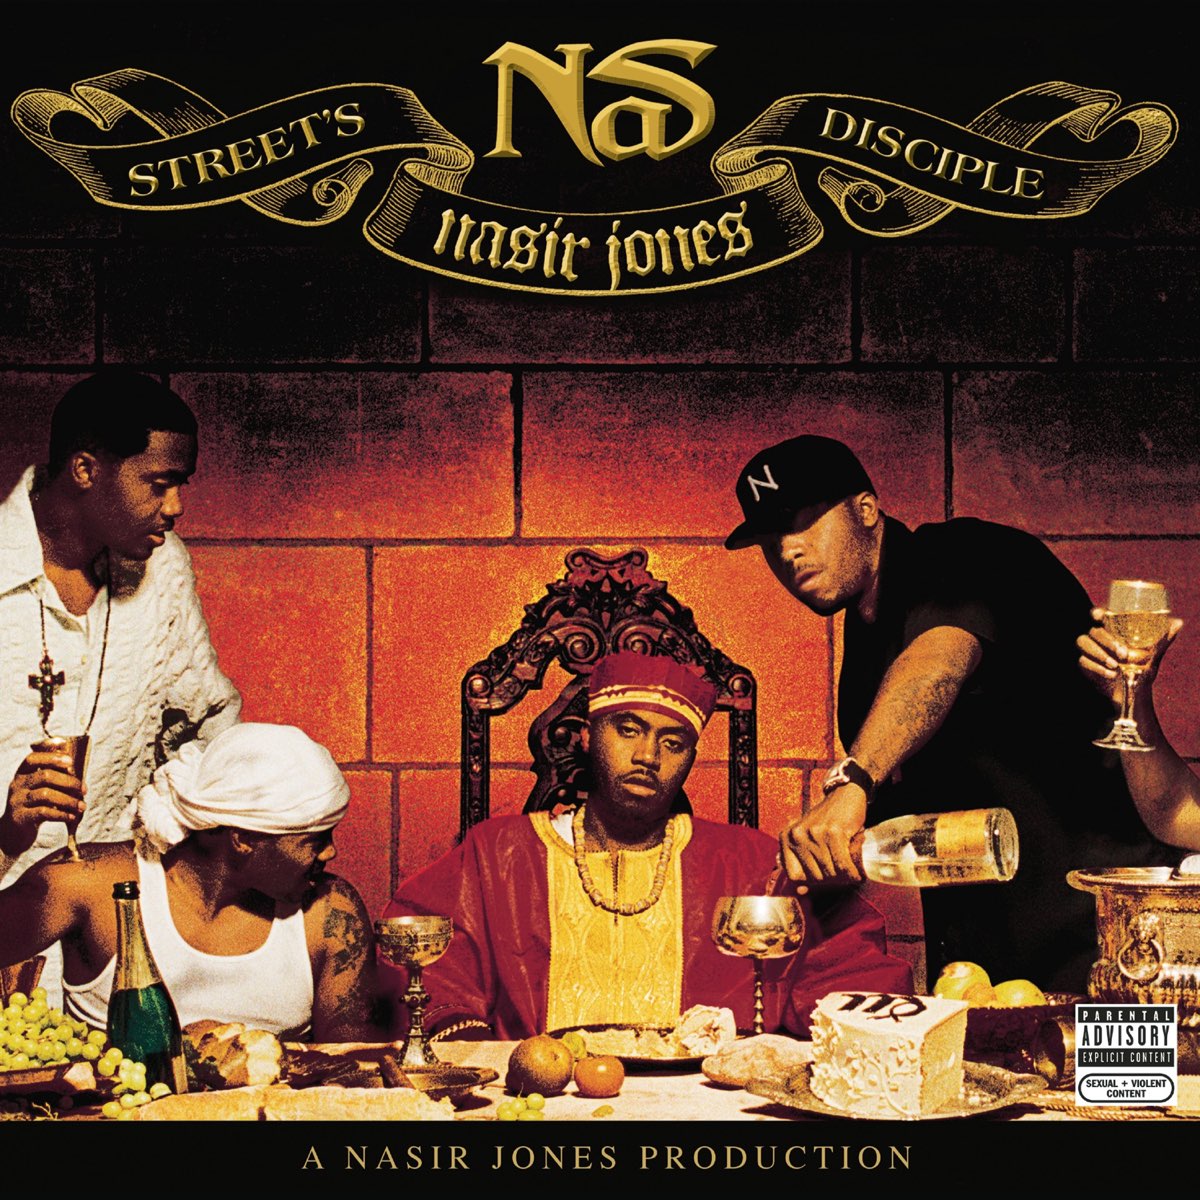 Nas featuring Scarlett — Live Now cover artwork